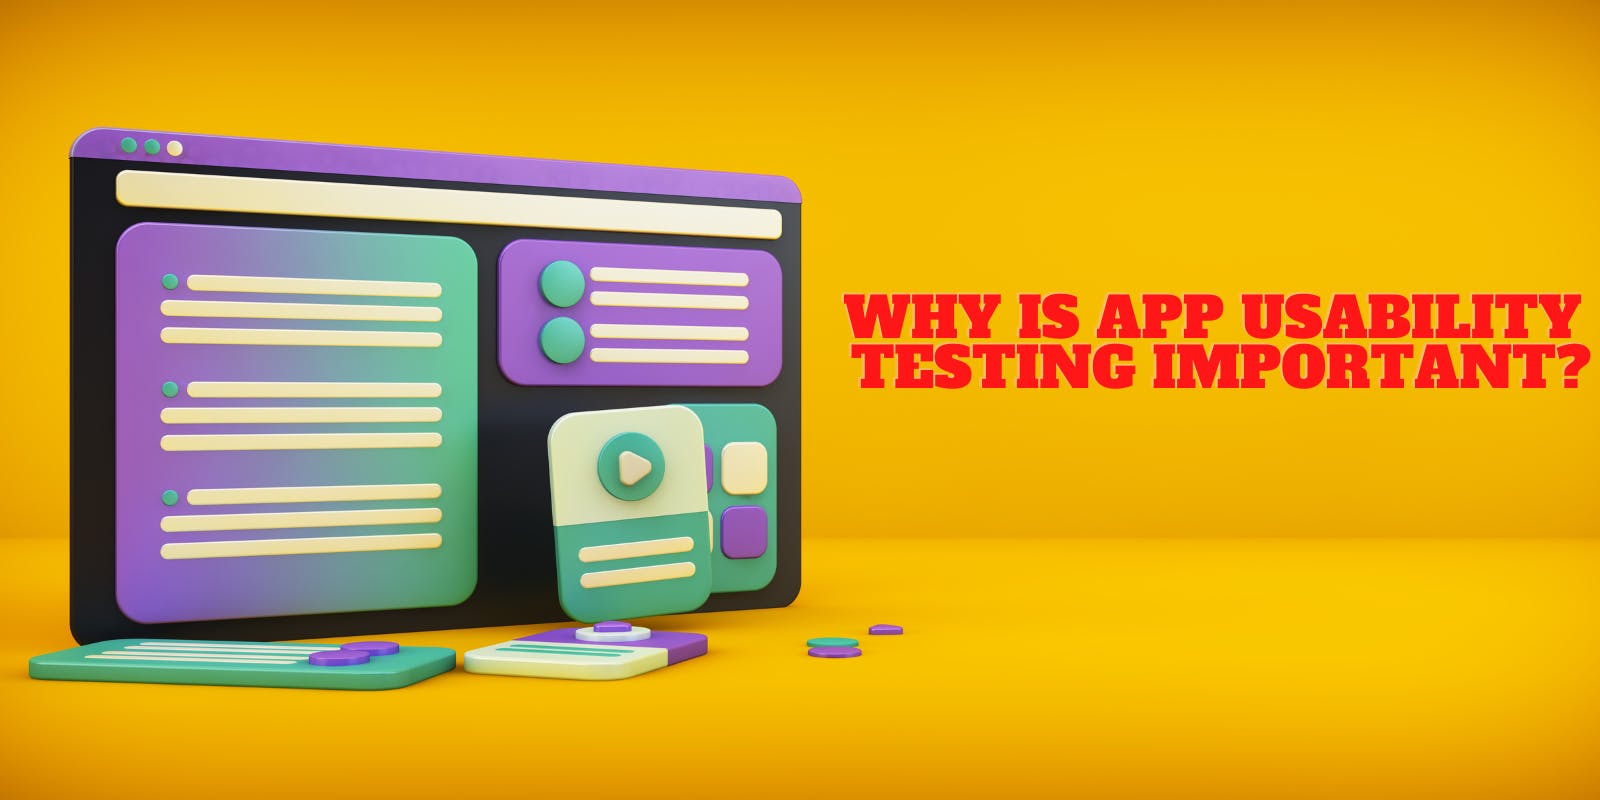 Why is app usability testing important?